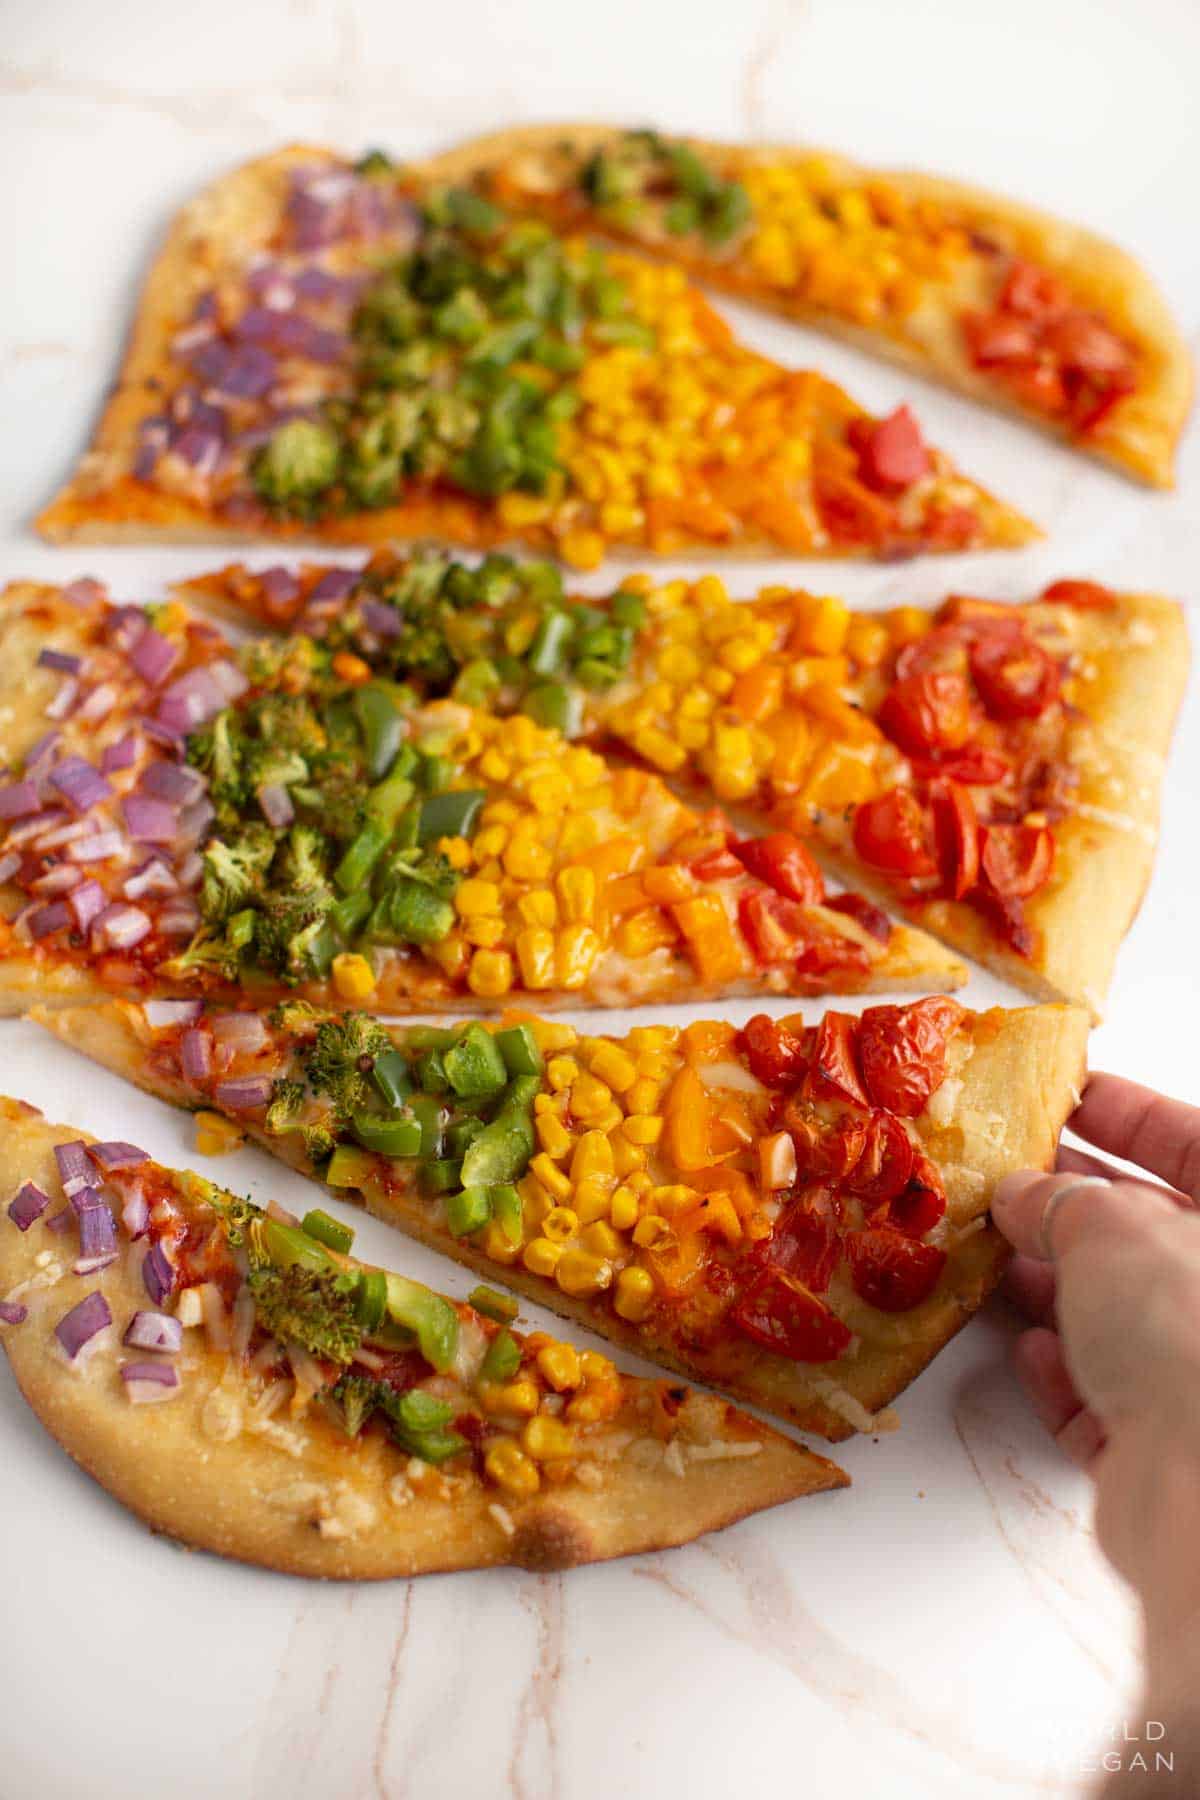 Homemade rainbow pizza with red, orange, yellow, green, and purple veggies cut into slices.